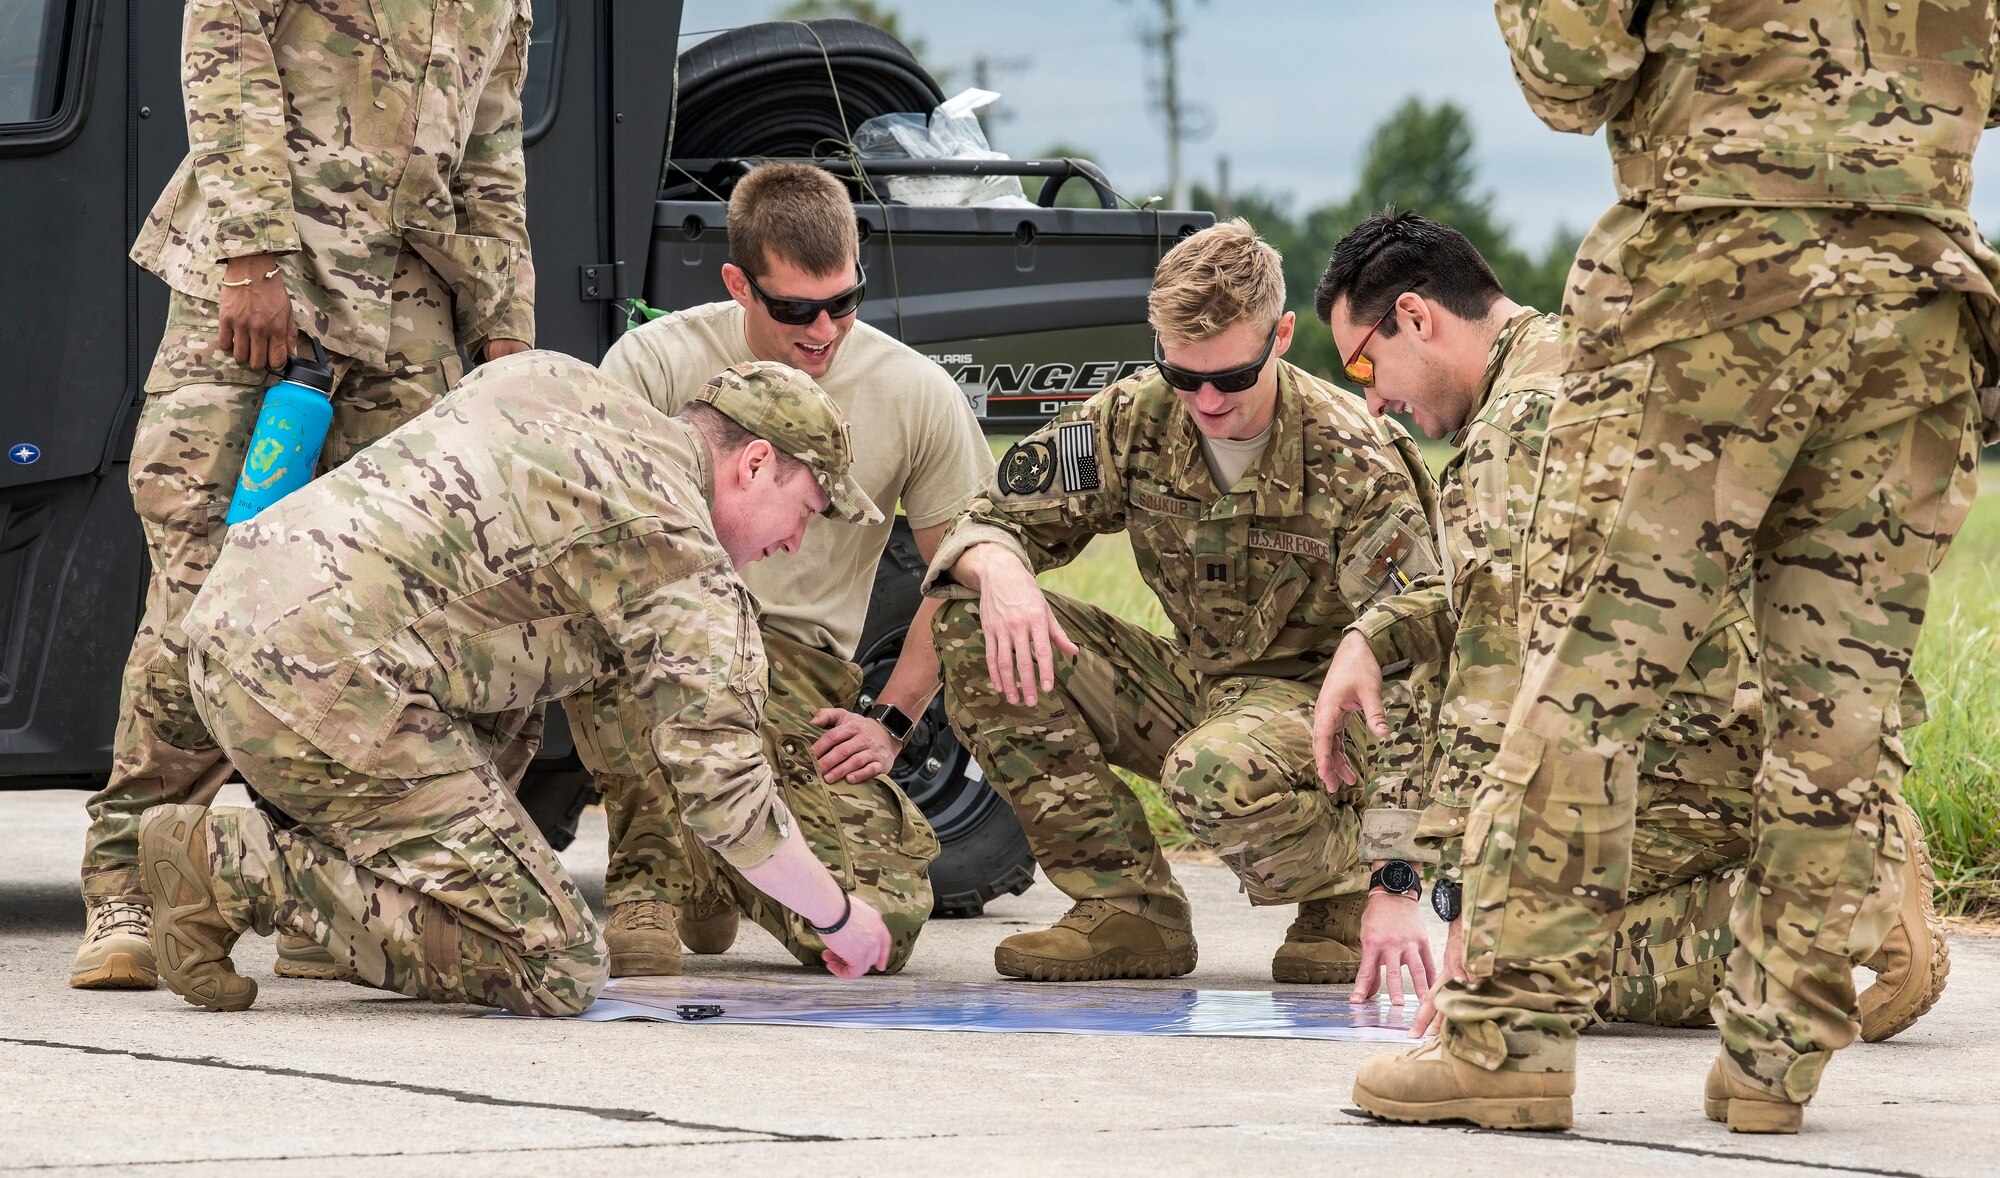 Alaska Air National Guard personnel from Joint Base Elmendorf-Richardson, Alaska,  look over a map Sept. 13, 2018, at Dover Air Force Base, Del. Members and equipment from the 176th Wing, 176th Aircraft Maintenance Squadron, 211th and 212th Rescue Squadrons at JBER  arrived at Dover on Sept. 12 to support hurricane relief efforts when called upon. (U.S. Air Force photo by Roland Balik)